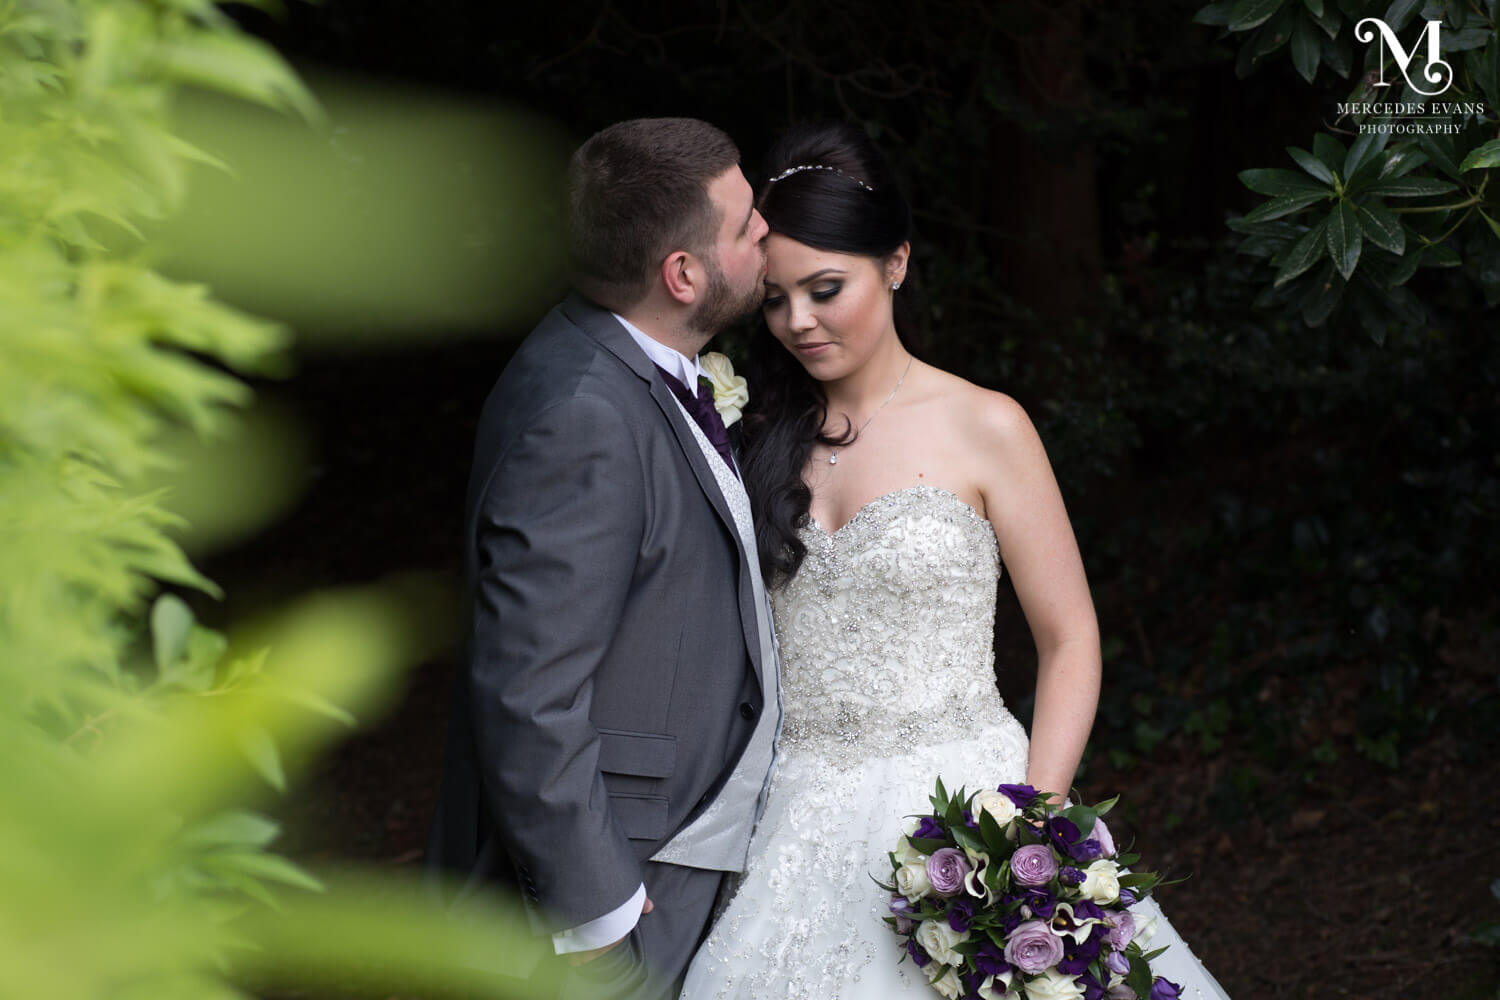 the groom kisses his new wife's forehead during their couple photo shoot at frimley Hall Hotel